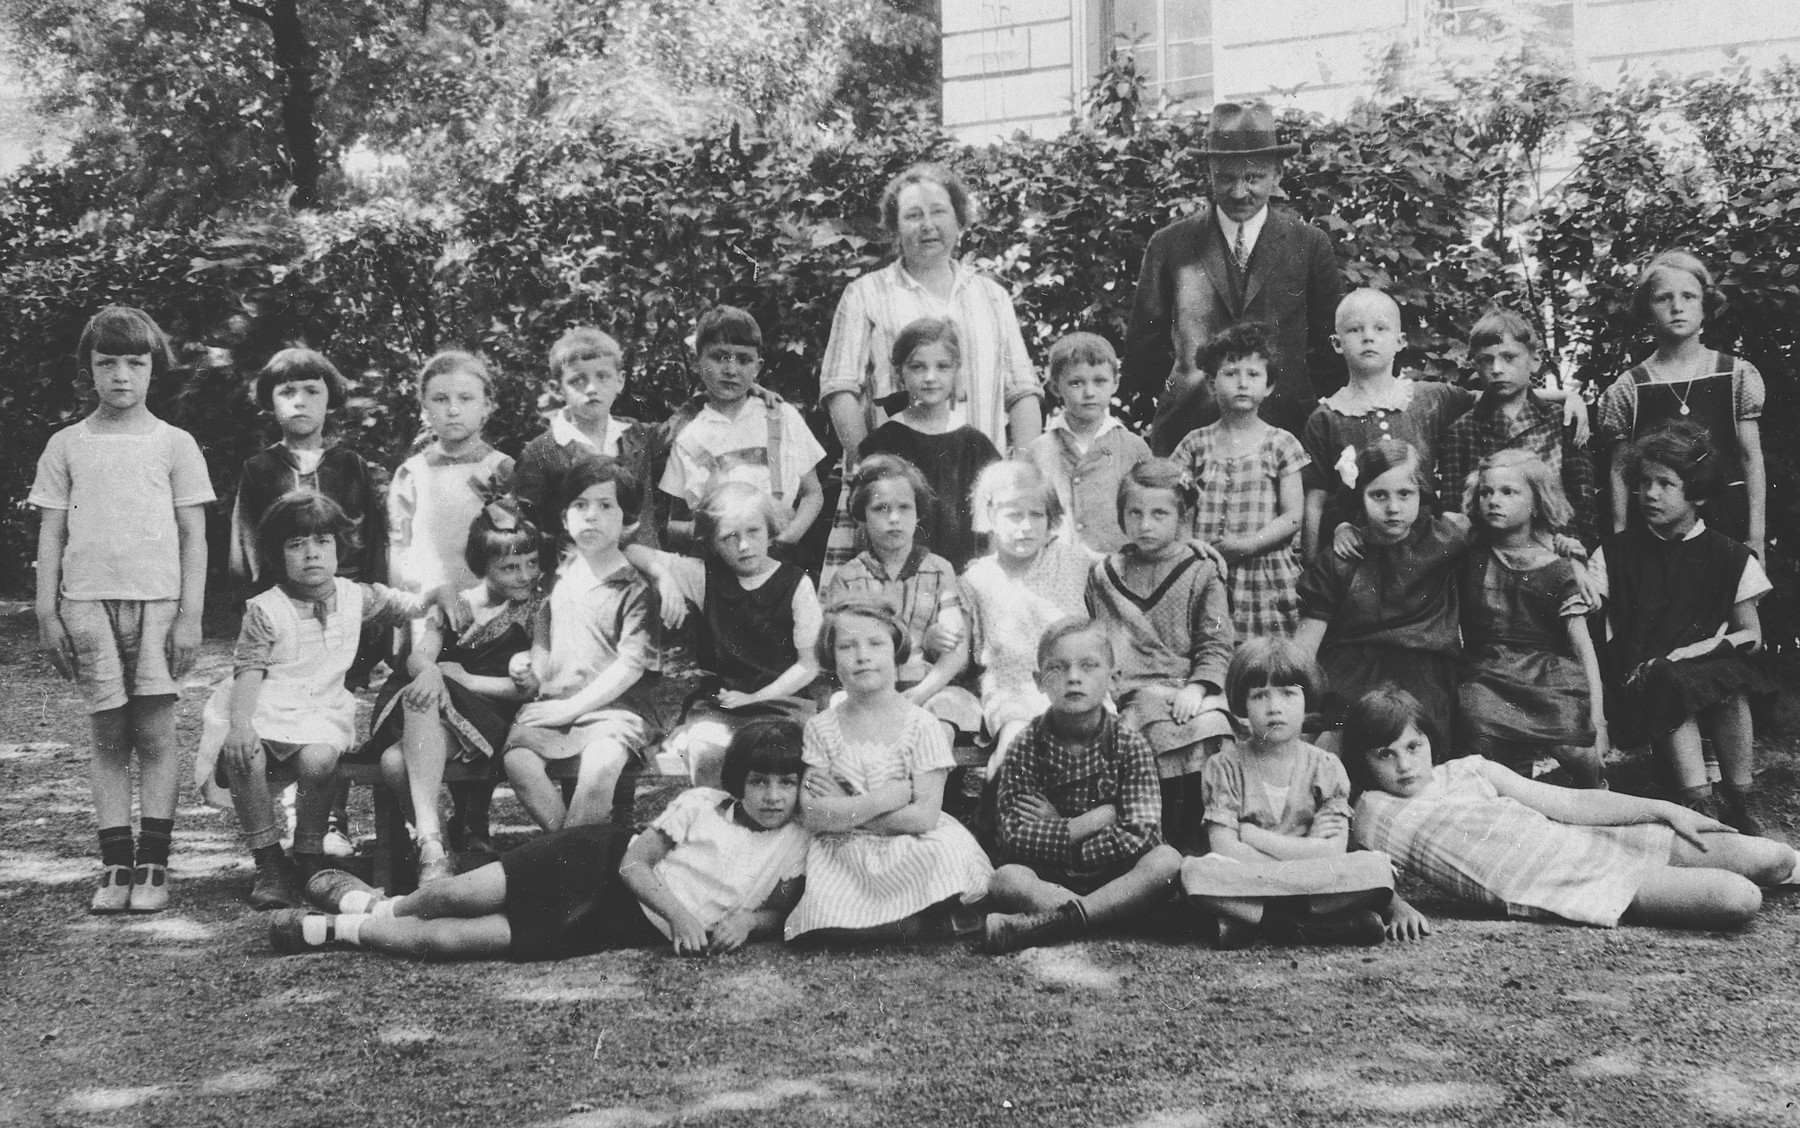 Austrian and Jewish children in a first grade class in Vienna Austria.

Hanni Deutsch is pictured in the second row on the far right.